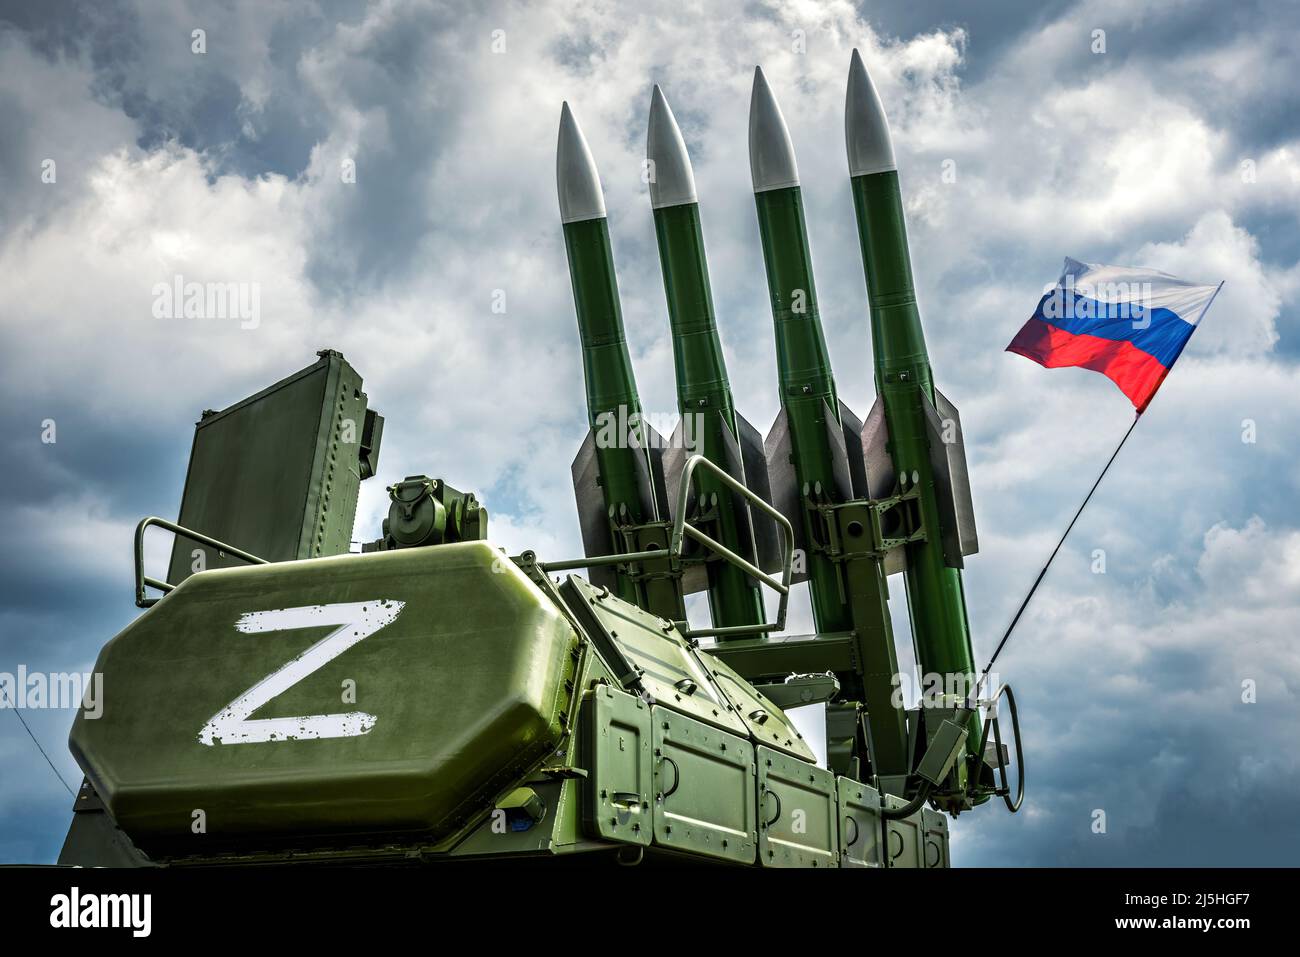 Russian missile system Buk-M2 with Z sign and flag, modern rocket weapons of forces of Russia, military equipment in combat readiness. Z-troops of Rus Stock Photo